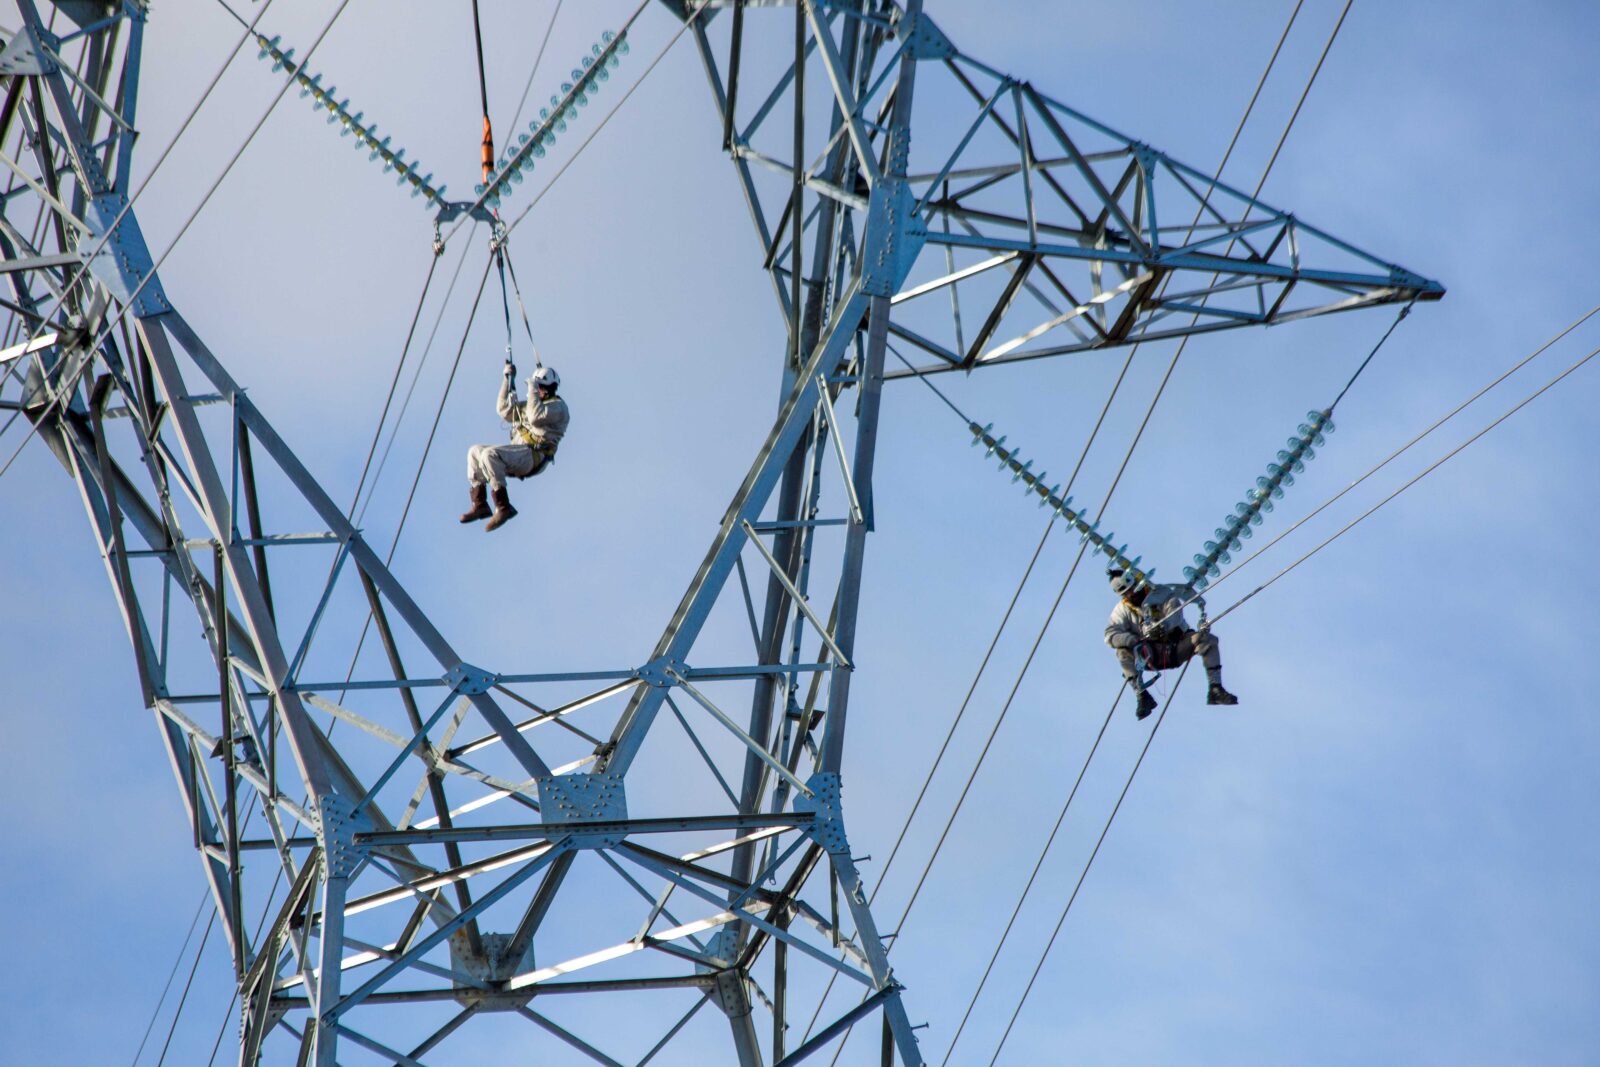 employees working on transmission line while hanging from harnesses